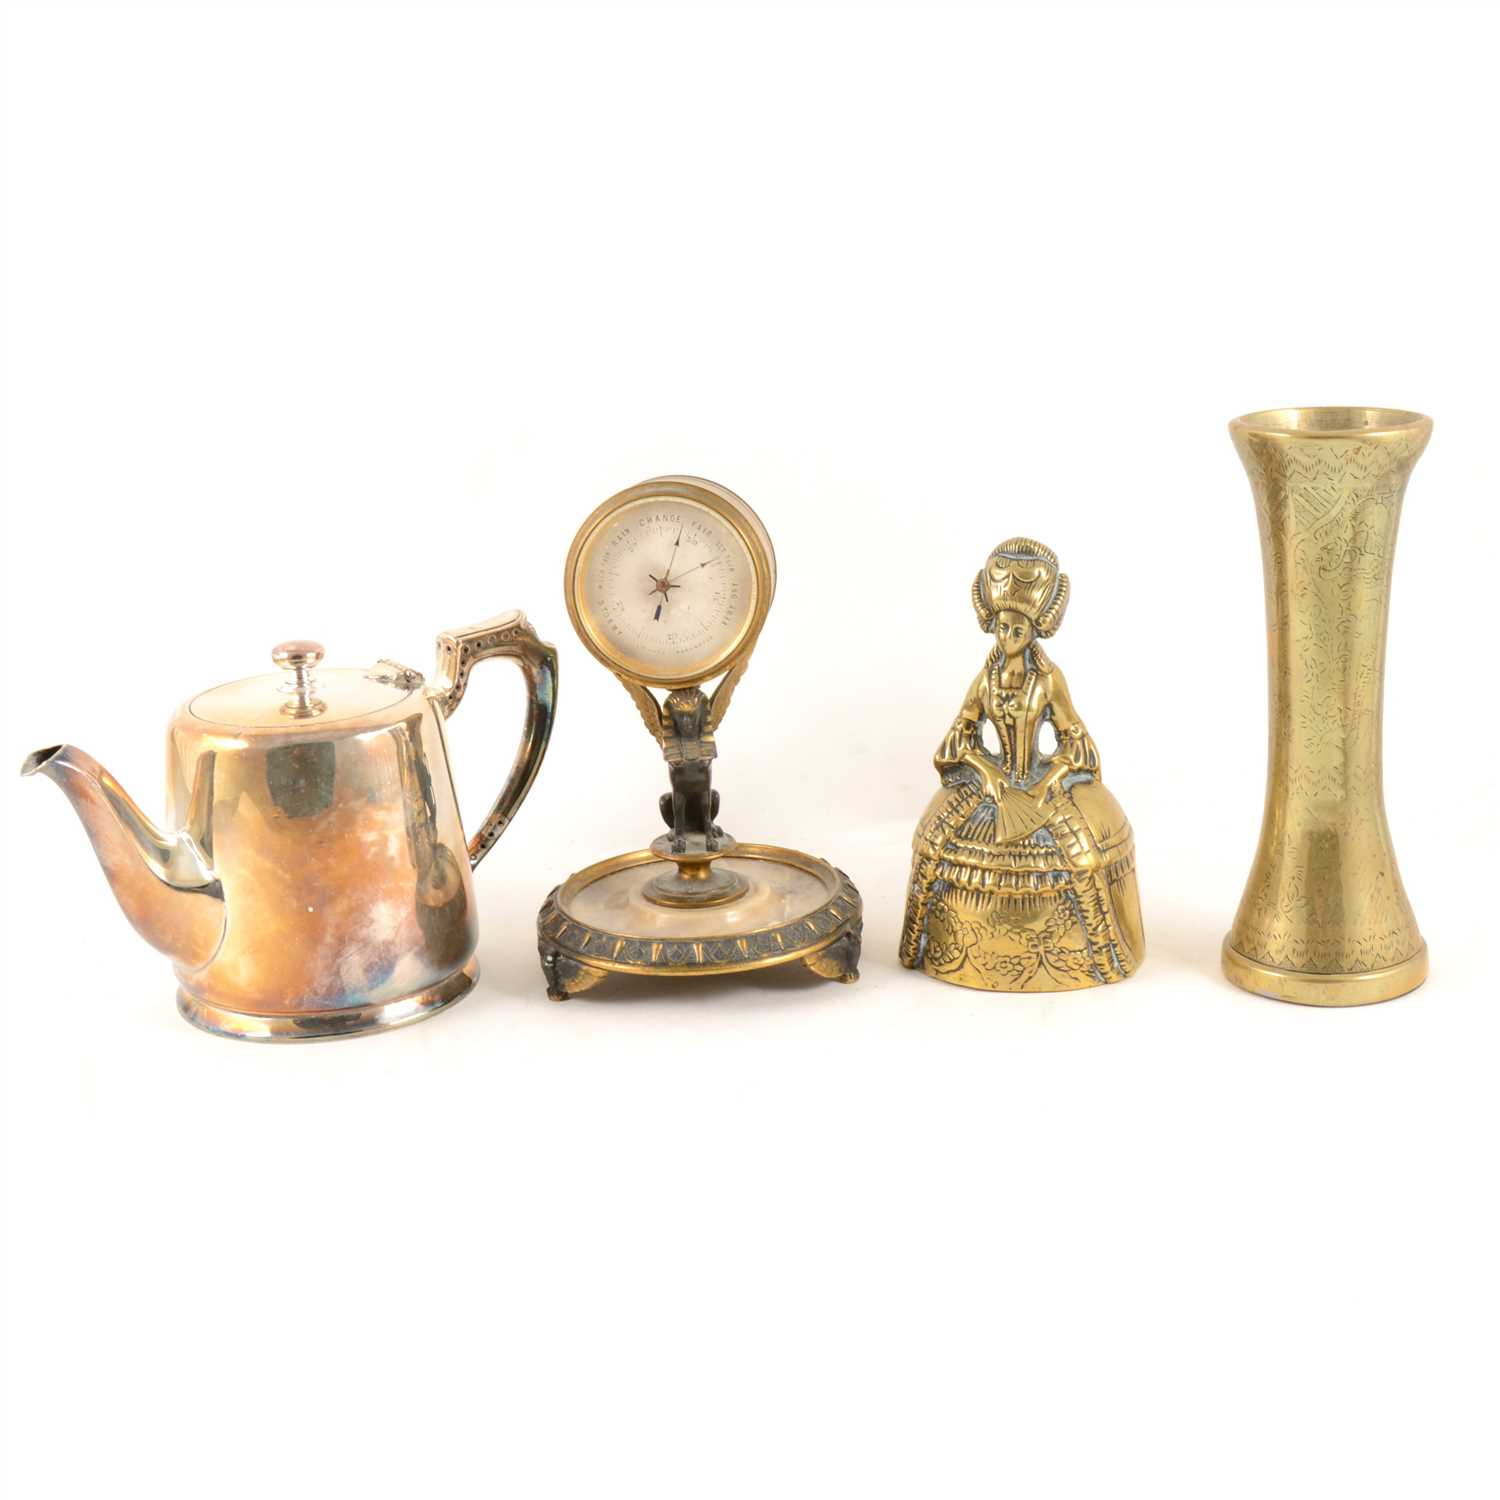 Lot 116 - A quantity of brass, copper and silver-plated wares, kettlem dishes, an oak framed circular wall barometer, and a barometer by W Moody Bell Cheltenham